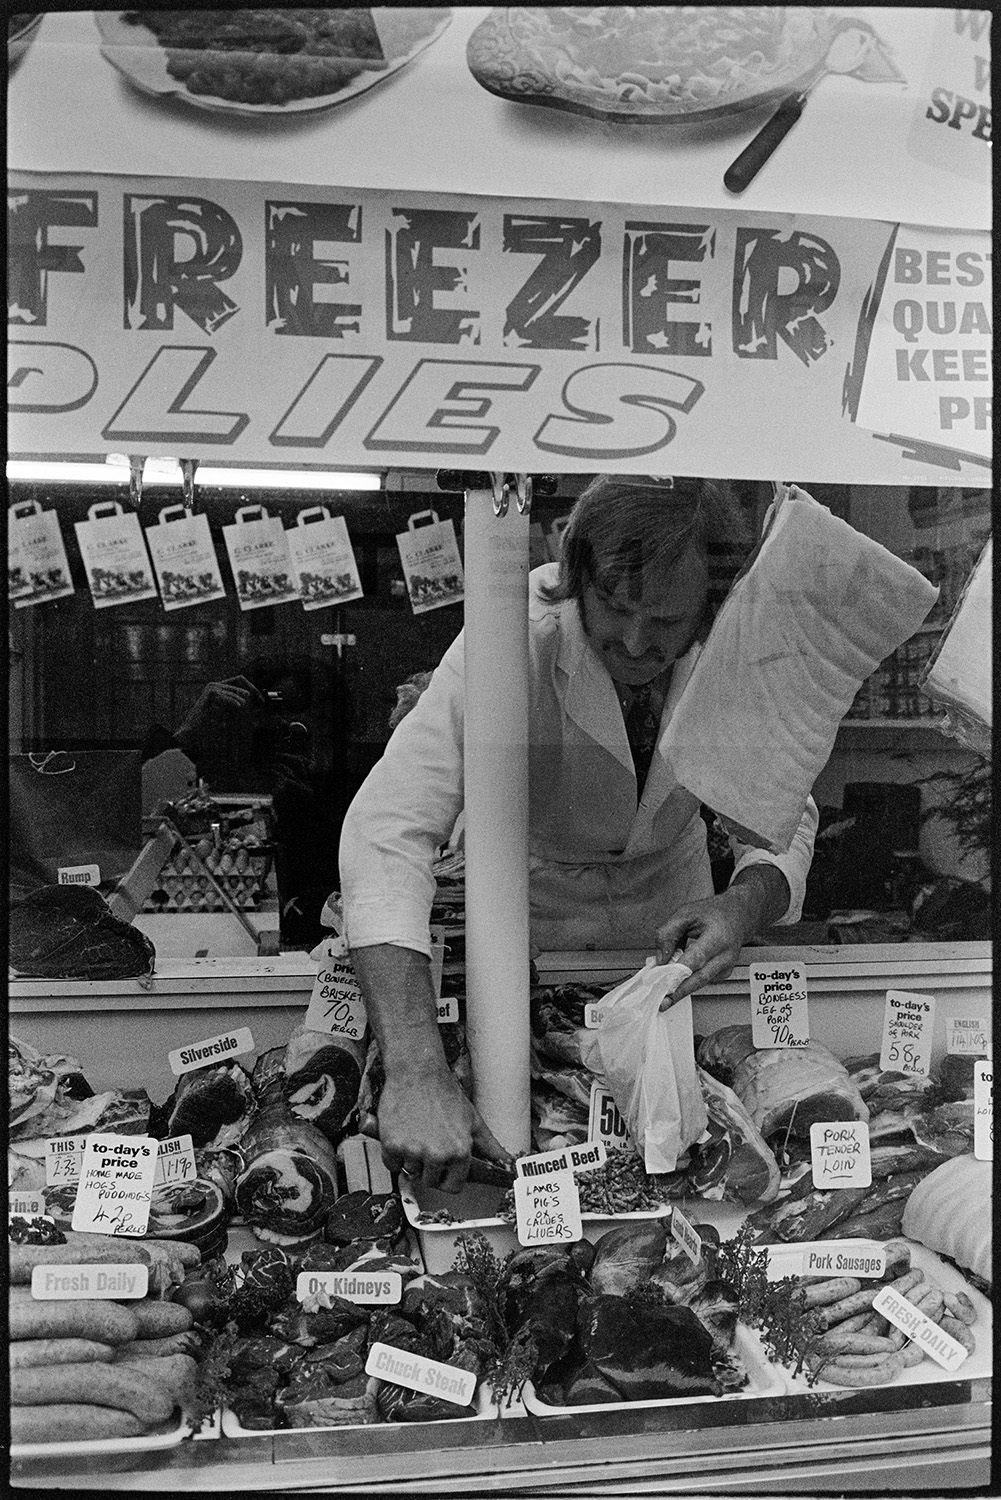 Interior of butcher's shop with customers. 
[A butcher bagging up cuts of meat from a window display in his butcher's shop for a customer, in South Molton.]